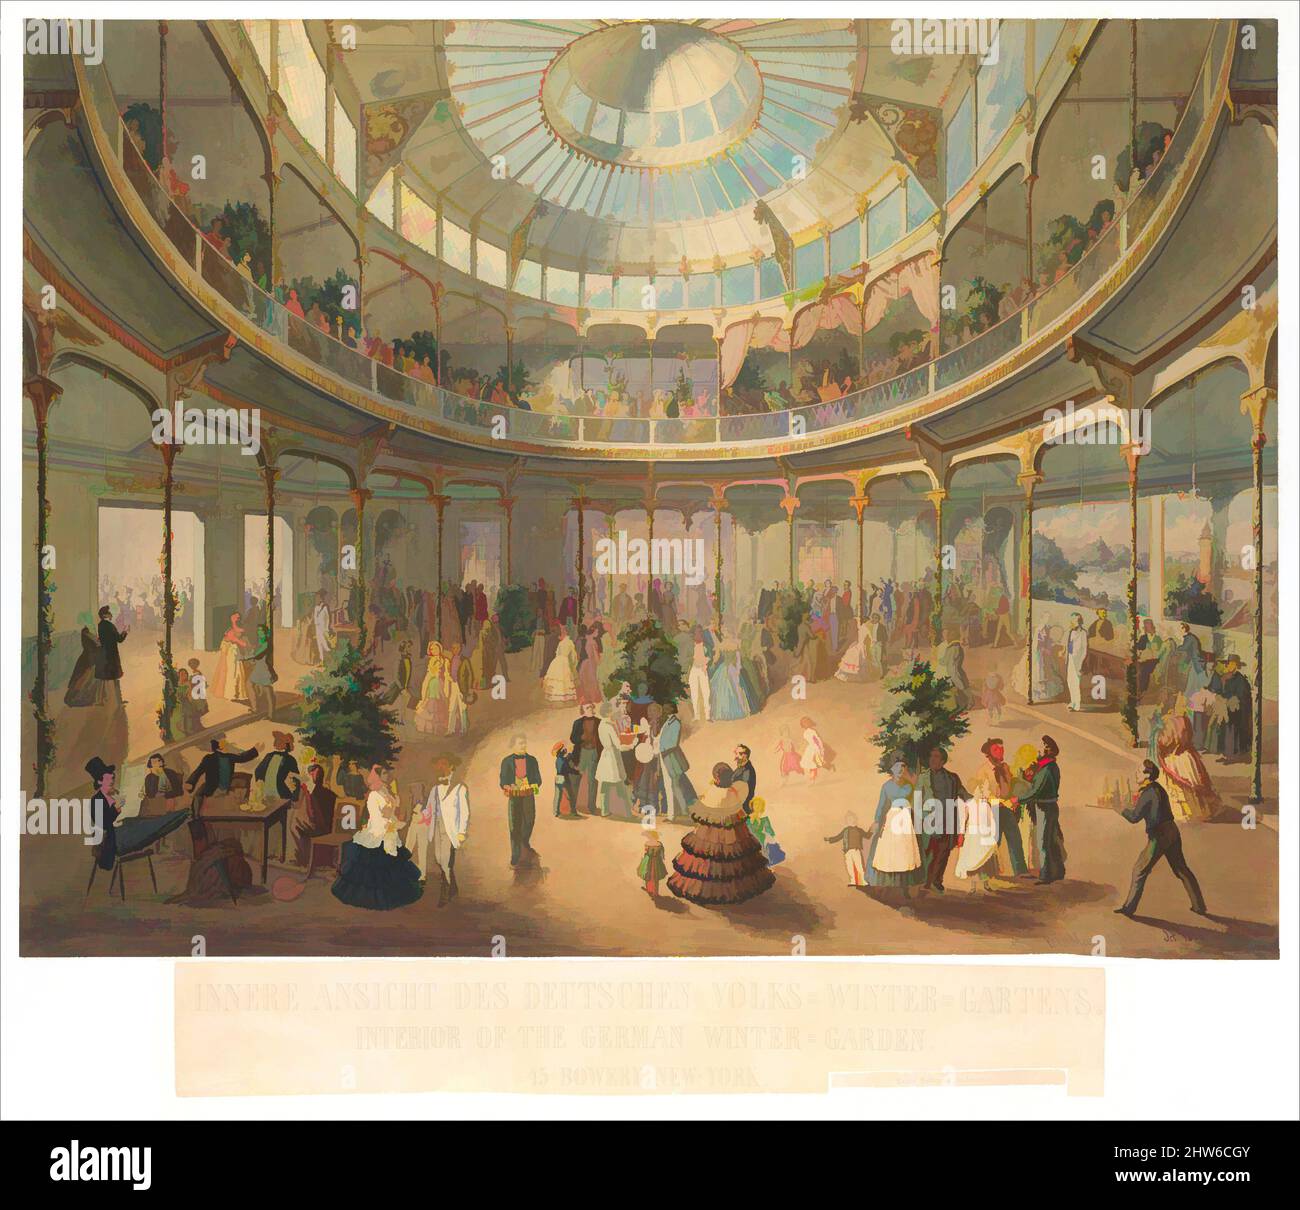 Art inspired by Innere Ansicht des Deutschen Volks Winter Gartens. Interior of the German Winter Garden. 45 Bowery, New York., 1856, Watercolor, Sheet: 22 1/16 × 29 1/2 in. (56 × 74.9 cm), Drawings, Fritz Meyer (American, active 1850s–80s), Interior of an entertainment center that, Classic works modernized by Artotop with a splash of modernity. Shapes, color and value, eye-catching visual impact on art. Emotions through freedom of artworks in a contemporary way. A timeless message pursuing a wildly creative new direction. Artists turning to the digital medium and creating the Artotop NFT Stock Photo